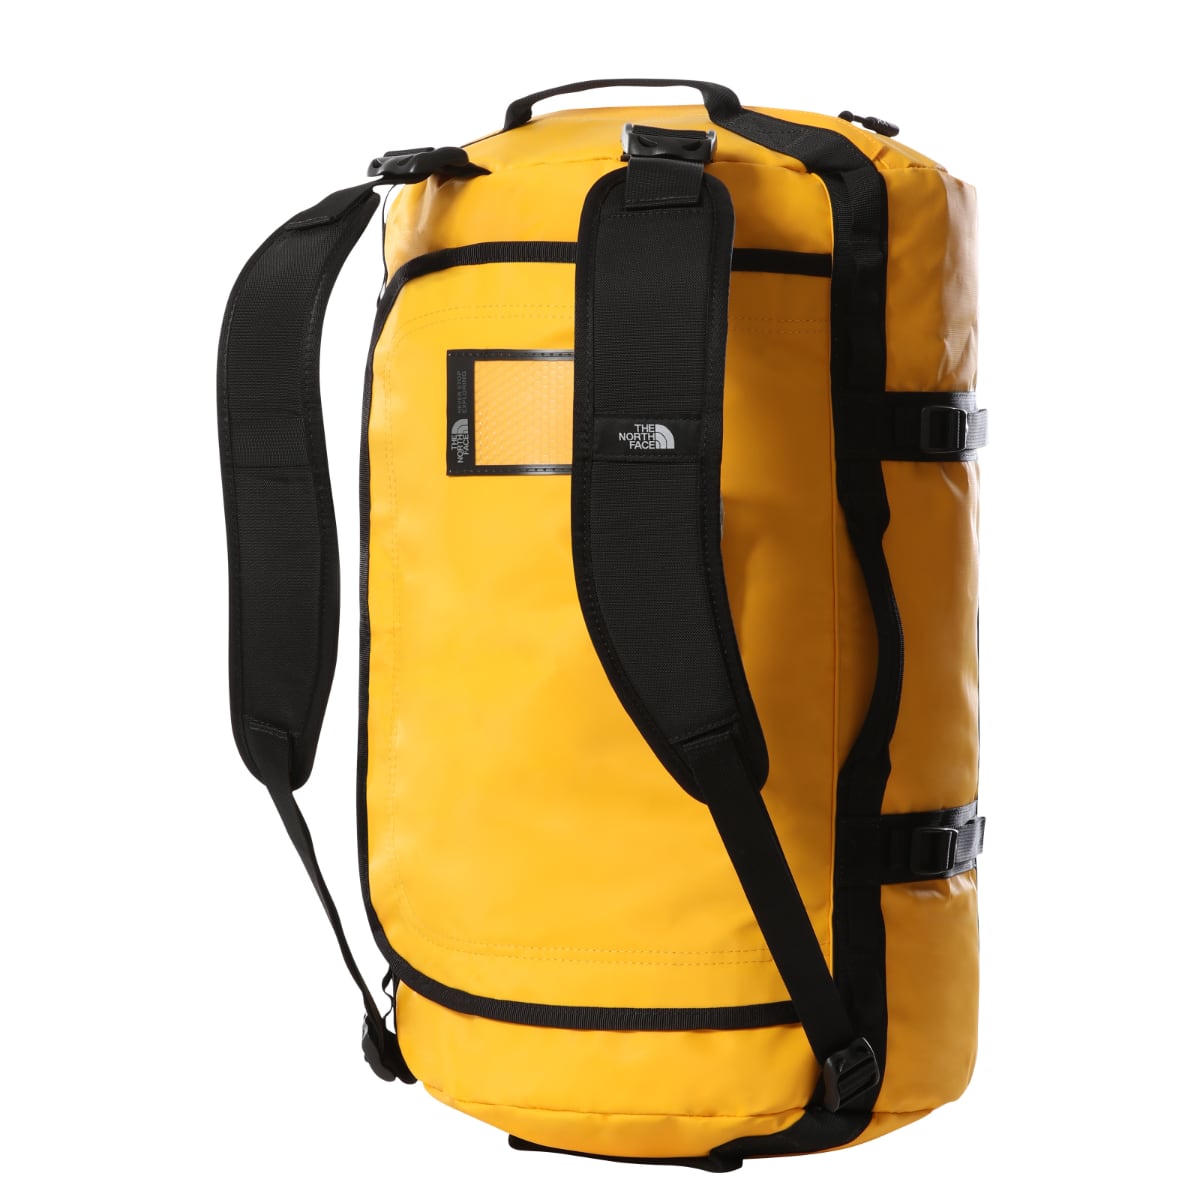 The North Face Base Camp Duffel Small | Summit Gold